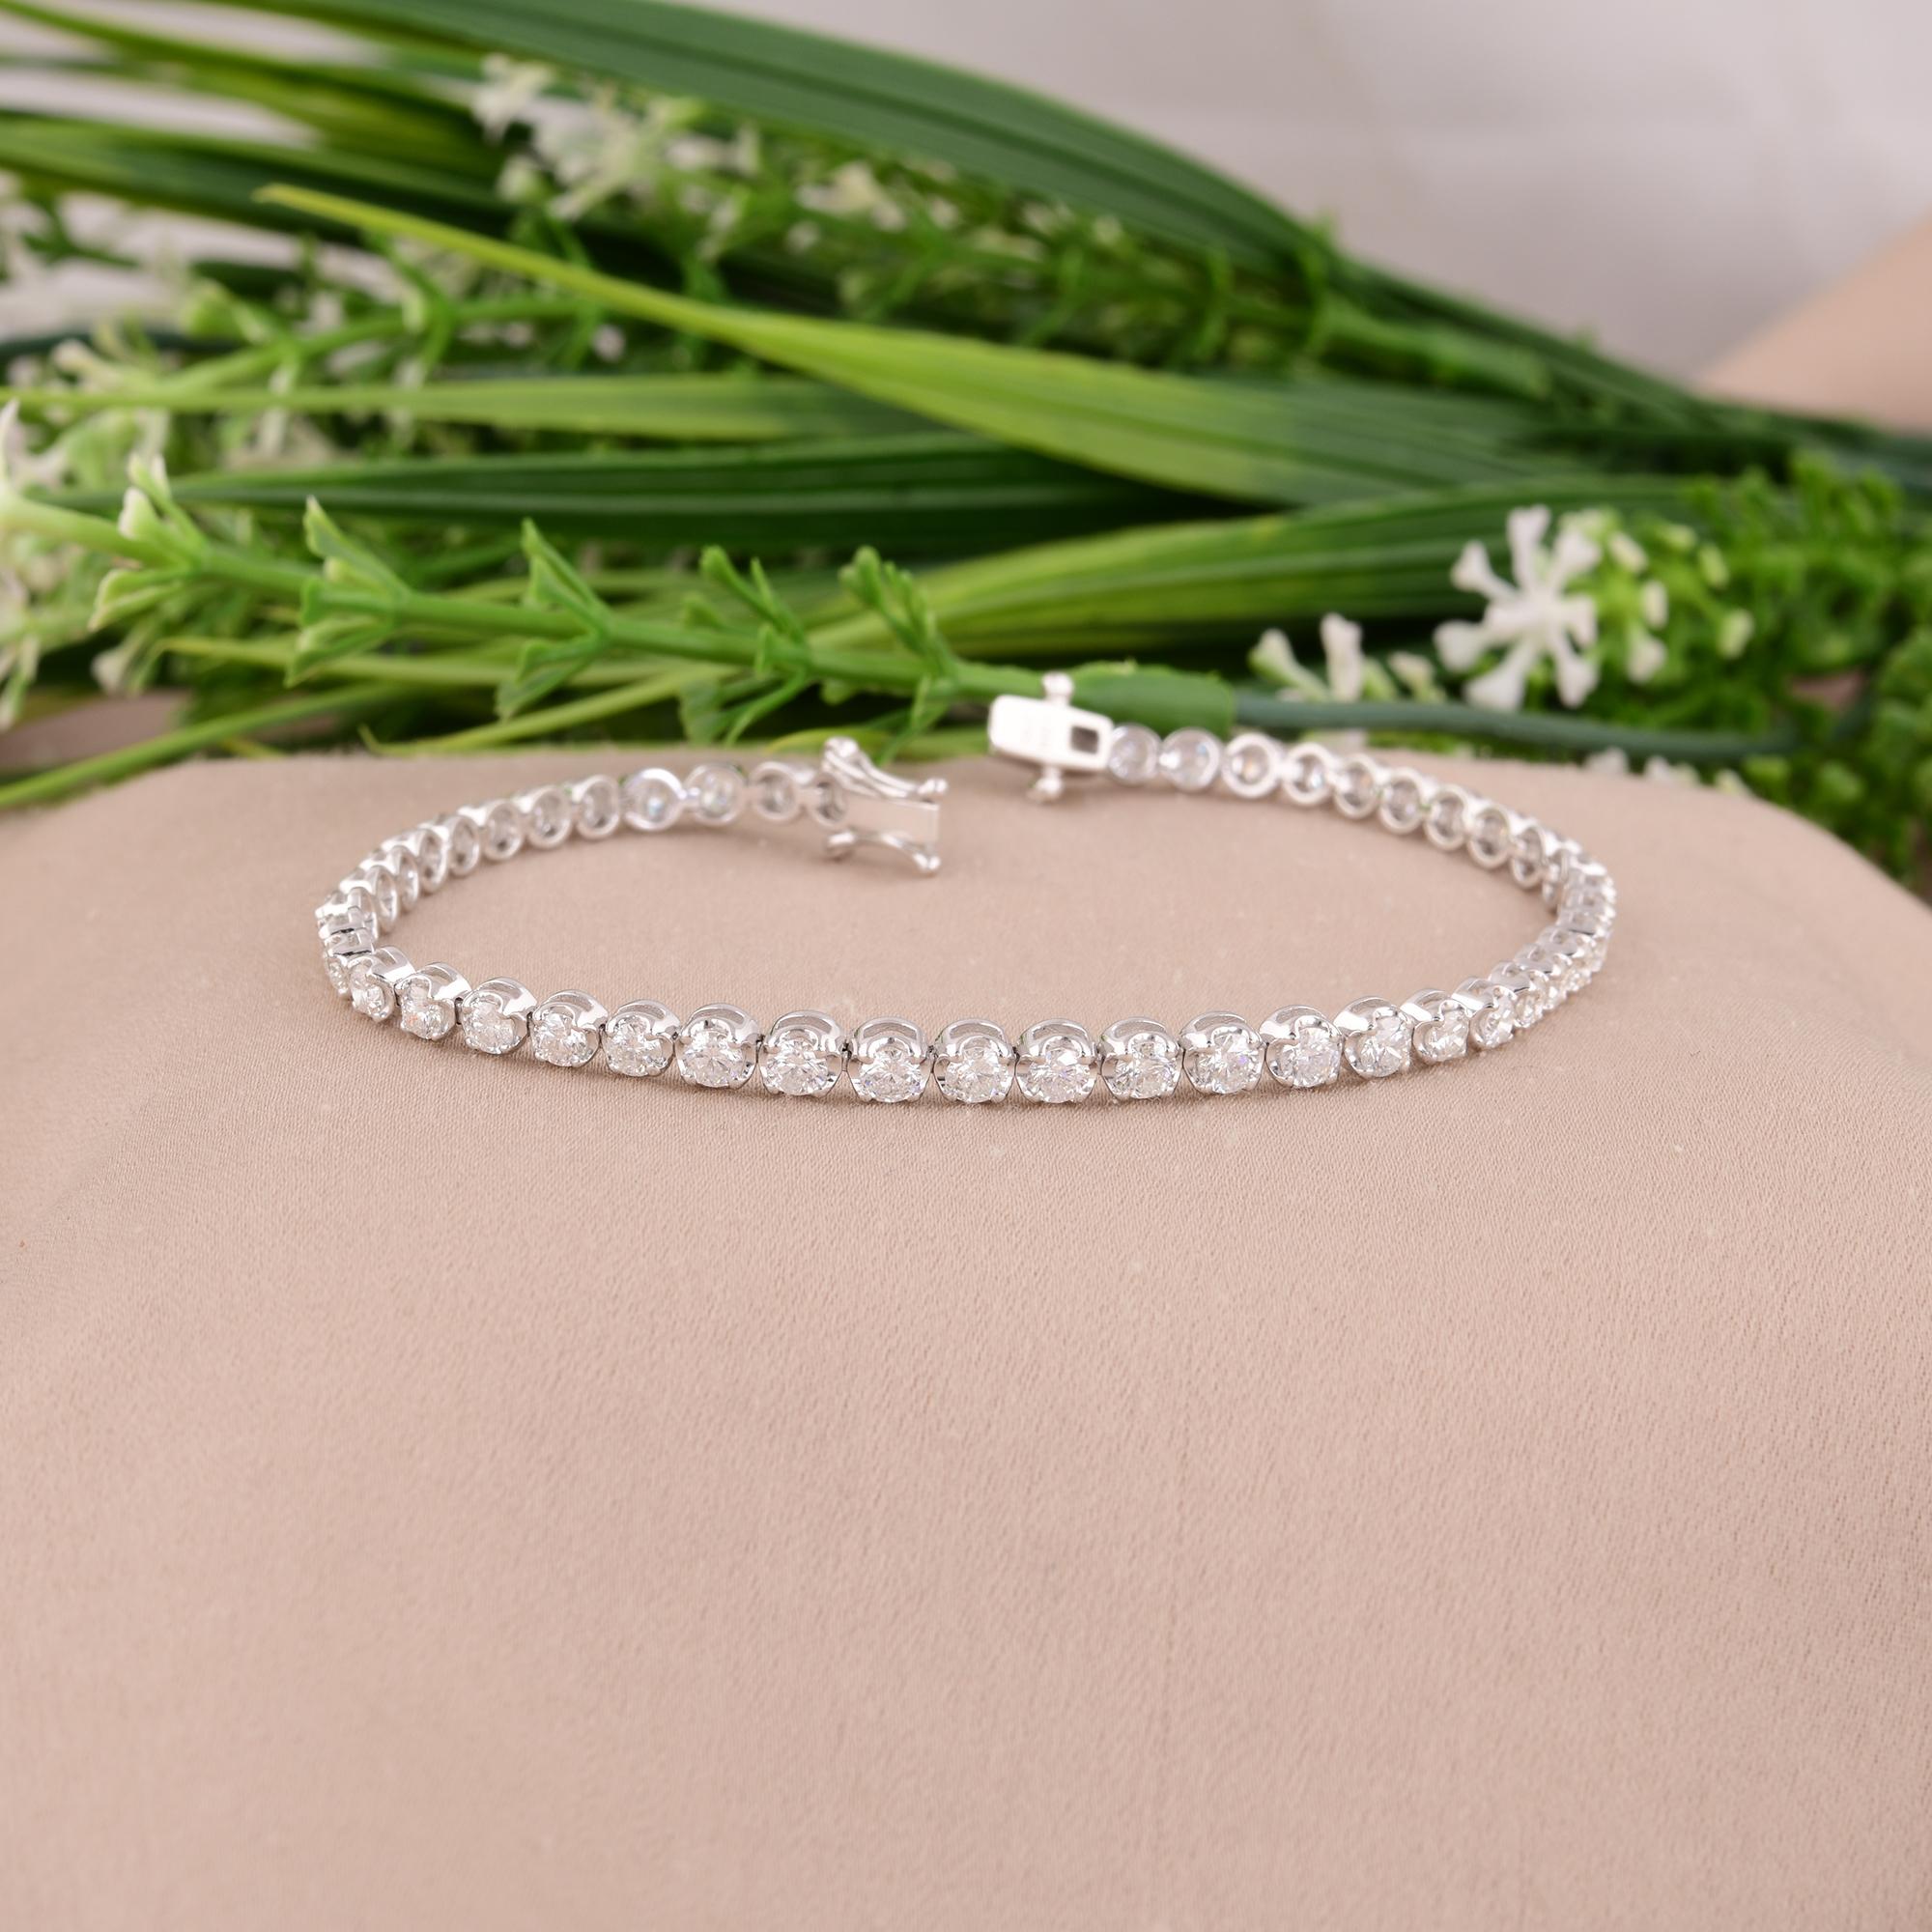 Each round diamond adorning this bracelet has been meticulously selected for its exceptional quality, boasting SI clarity and HI color. This ensures that every facet sparkles with brilliance, catching the light from every angle and captivating all